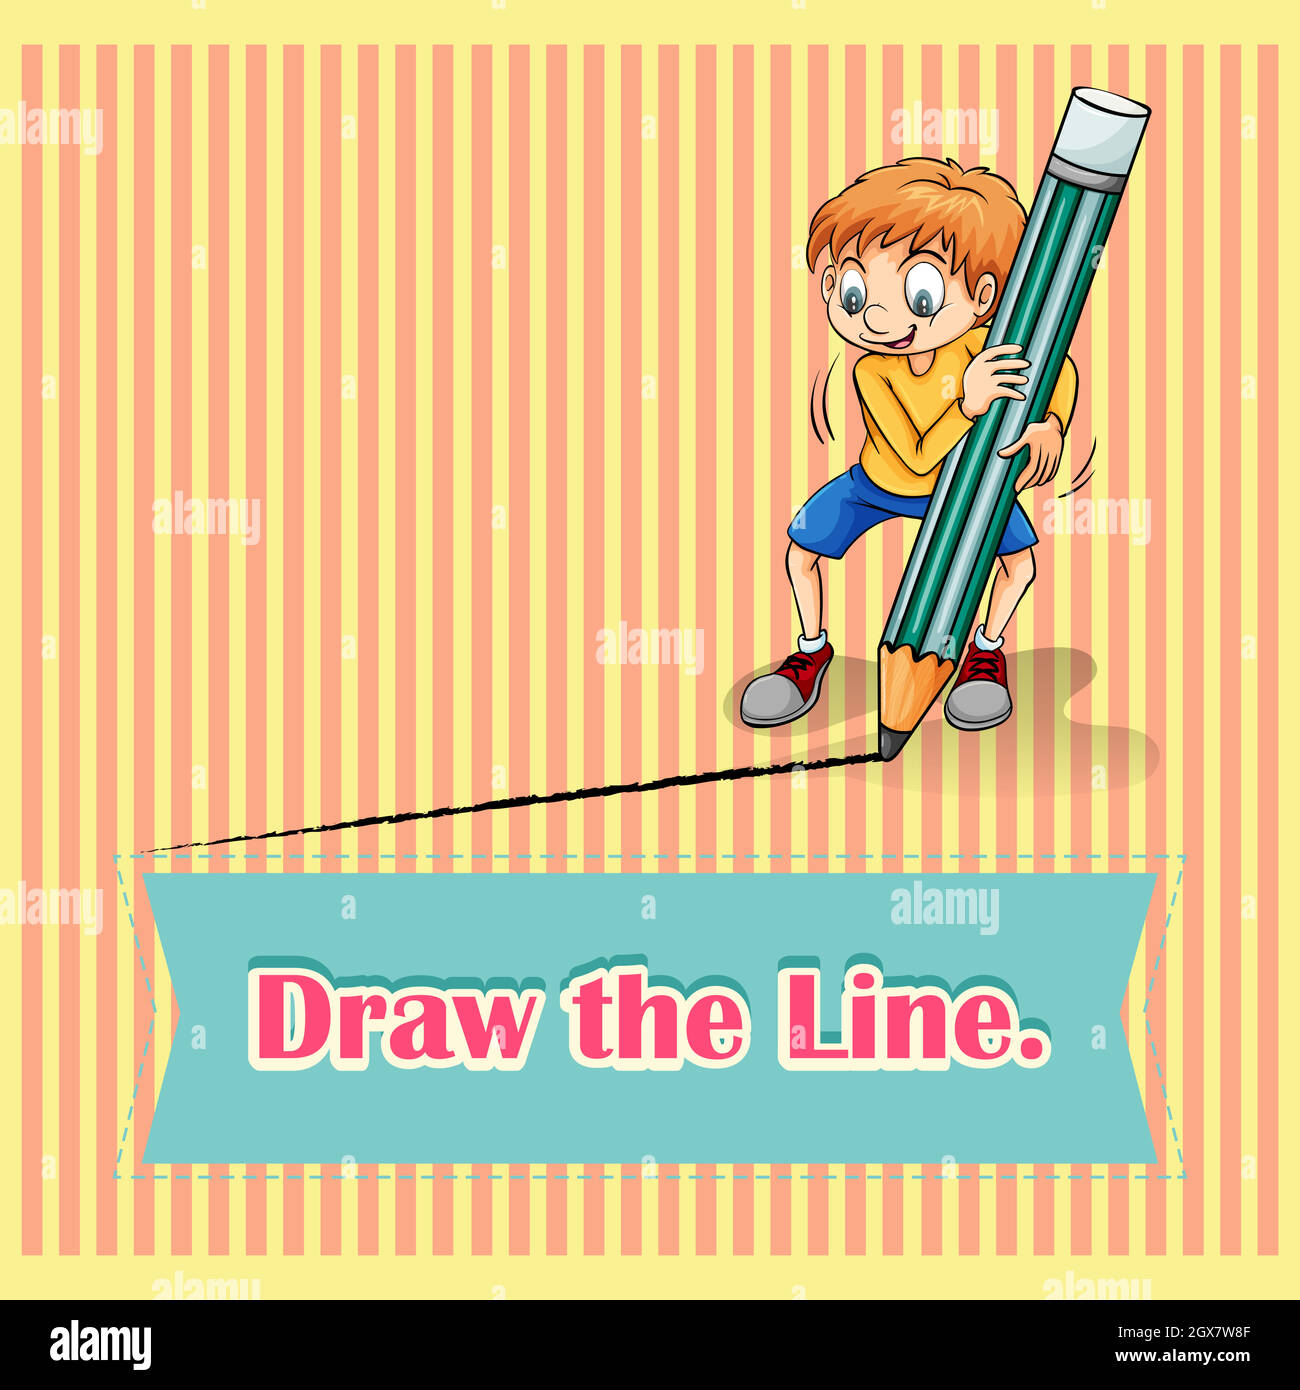 Old saying draw the line Stock Vector